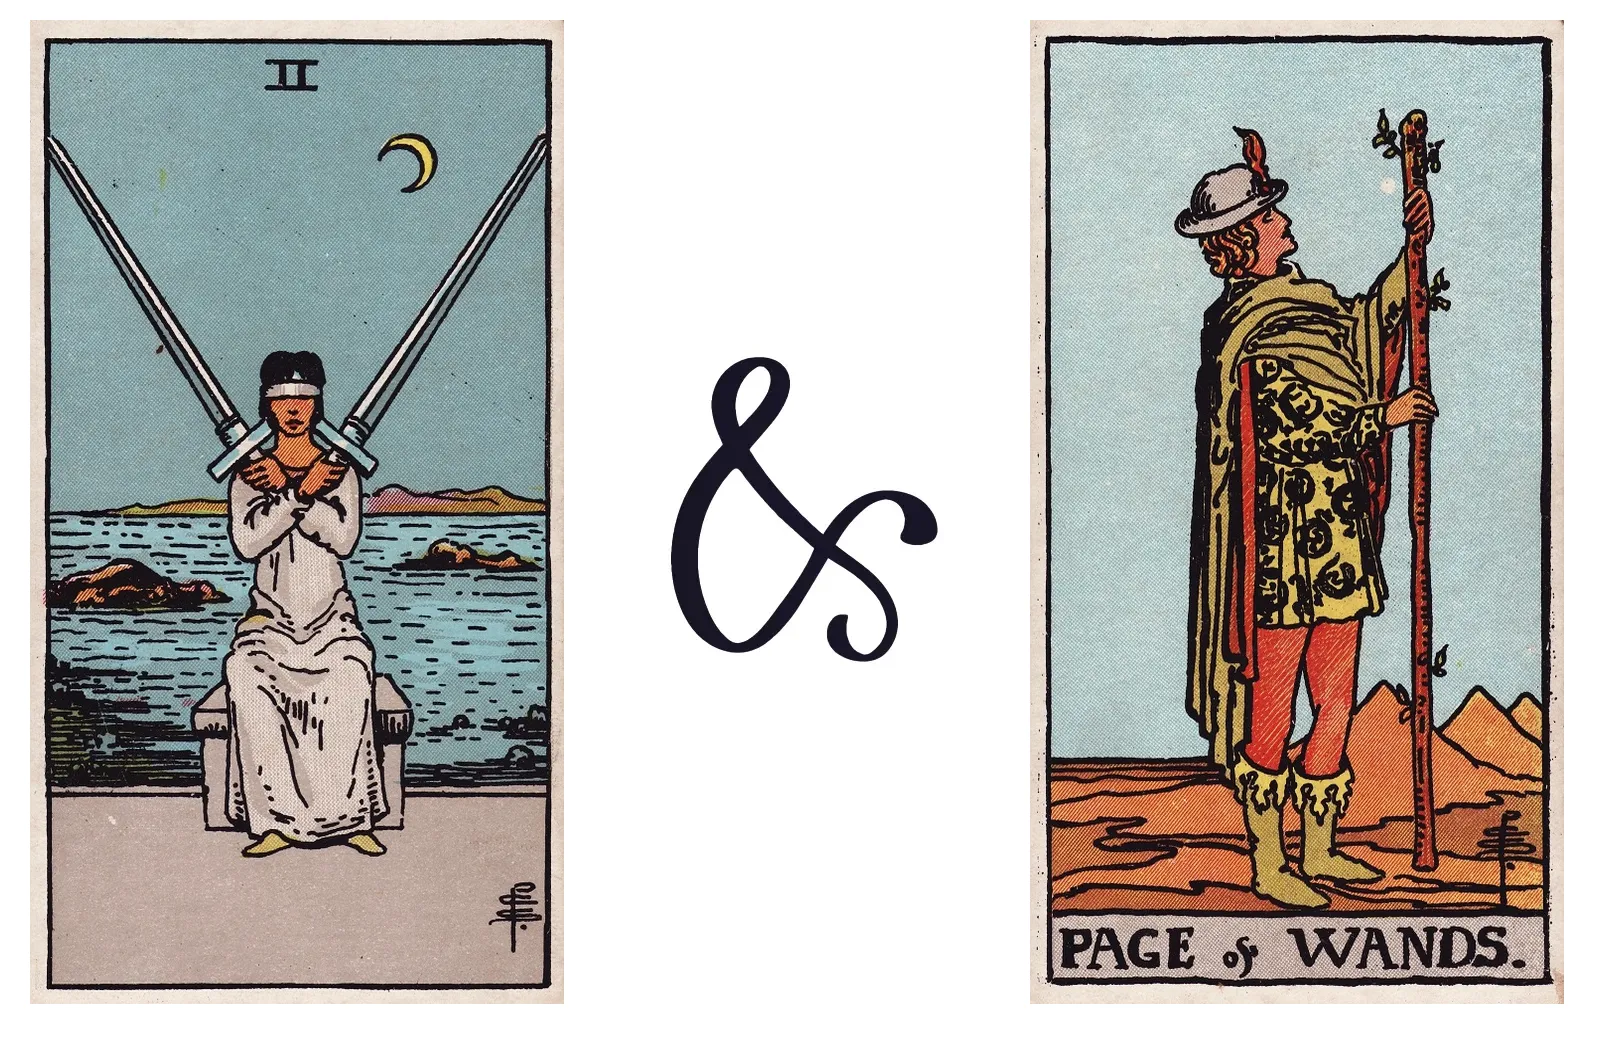 Two of Swords and Page of Wands